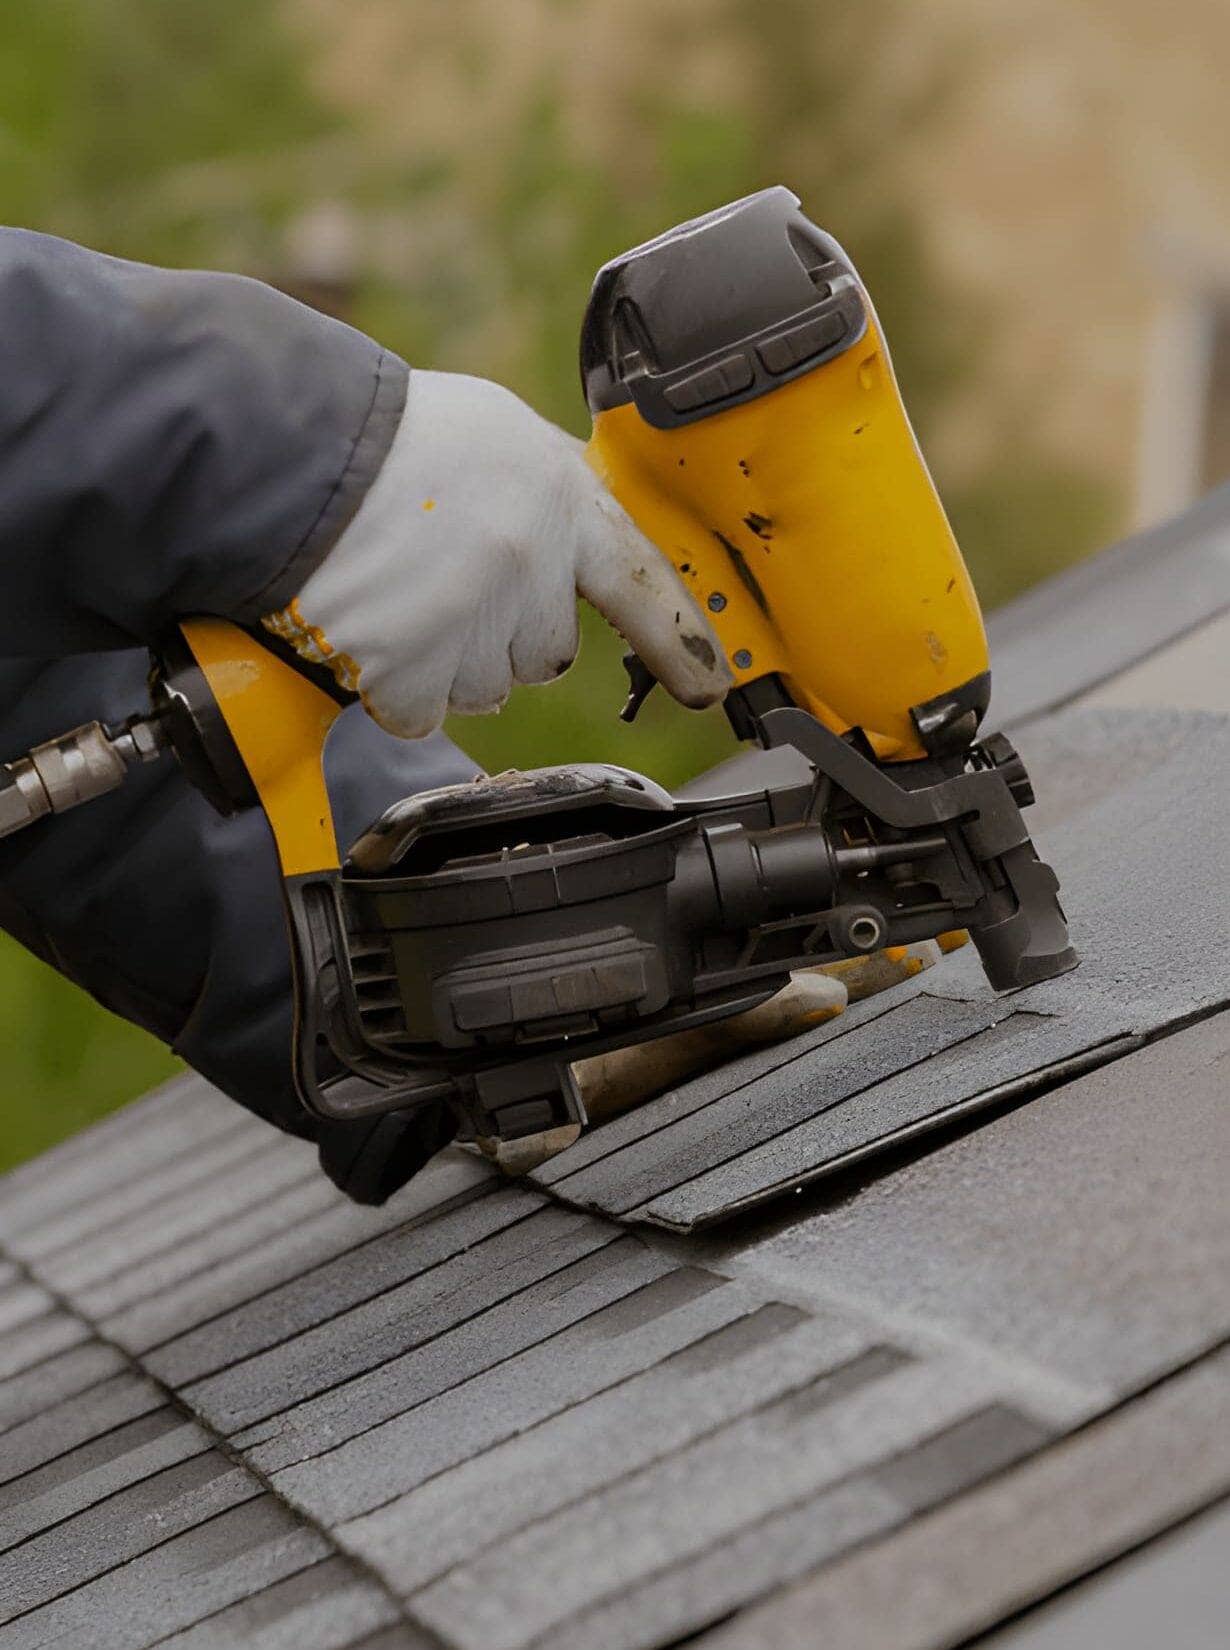 Professional Roofing Services in Ottawa